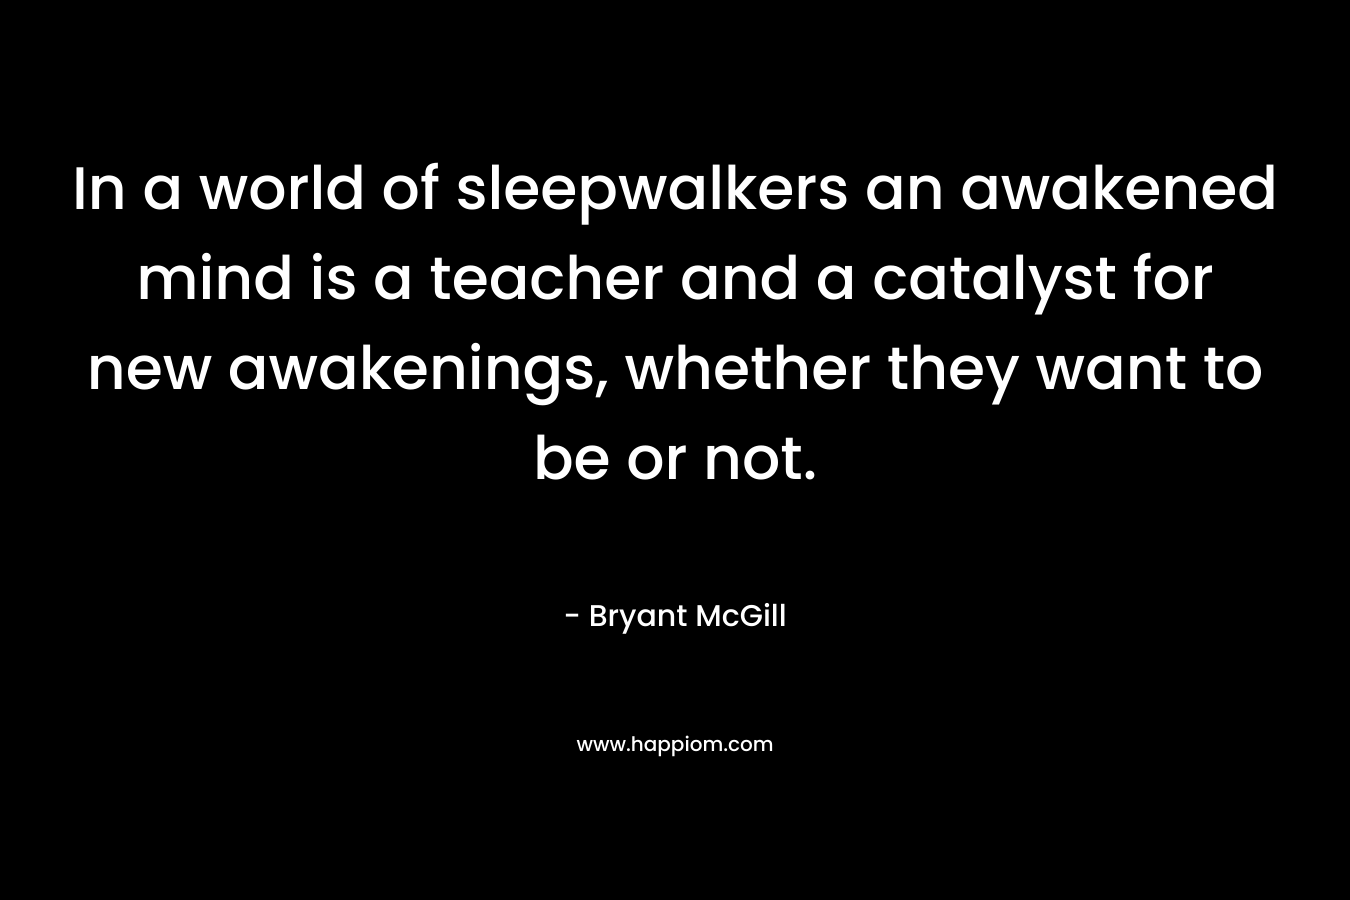 In a world of sleepwalkers an awakened mind is a teacher and a catalyst for new awakenings, whether they want to be or not. – Bryant McGill